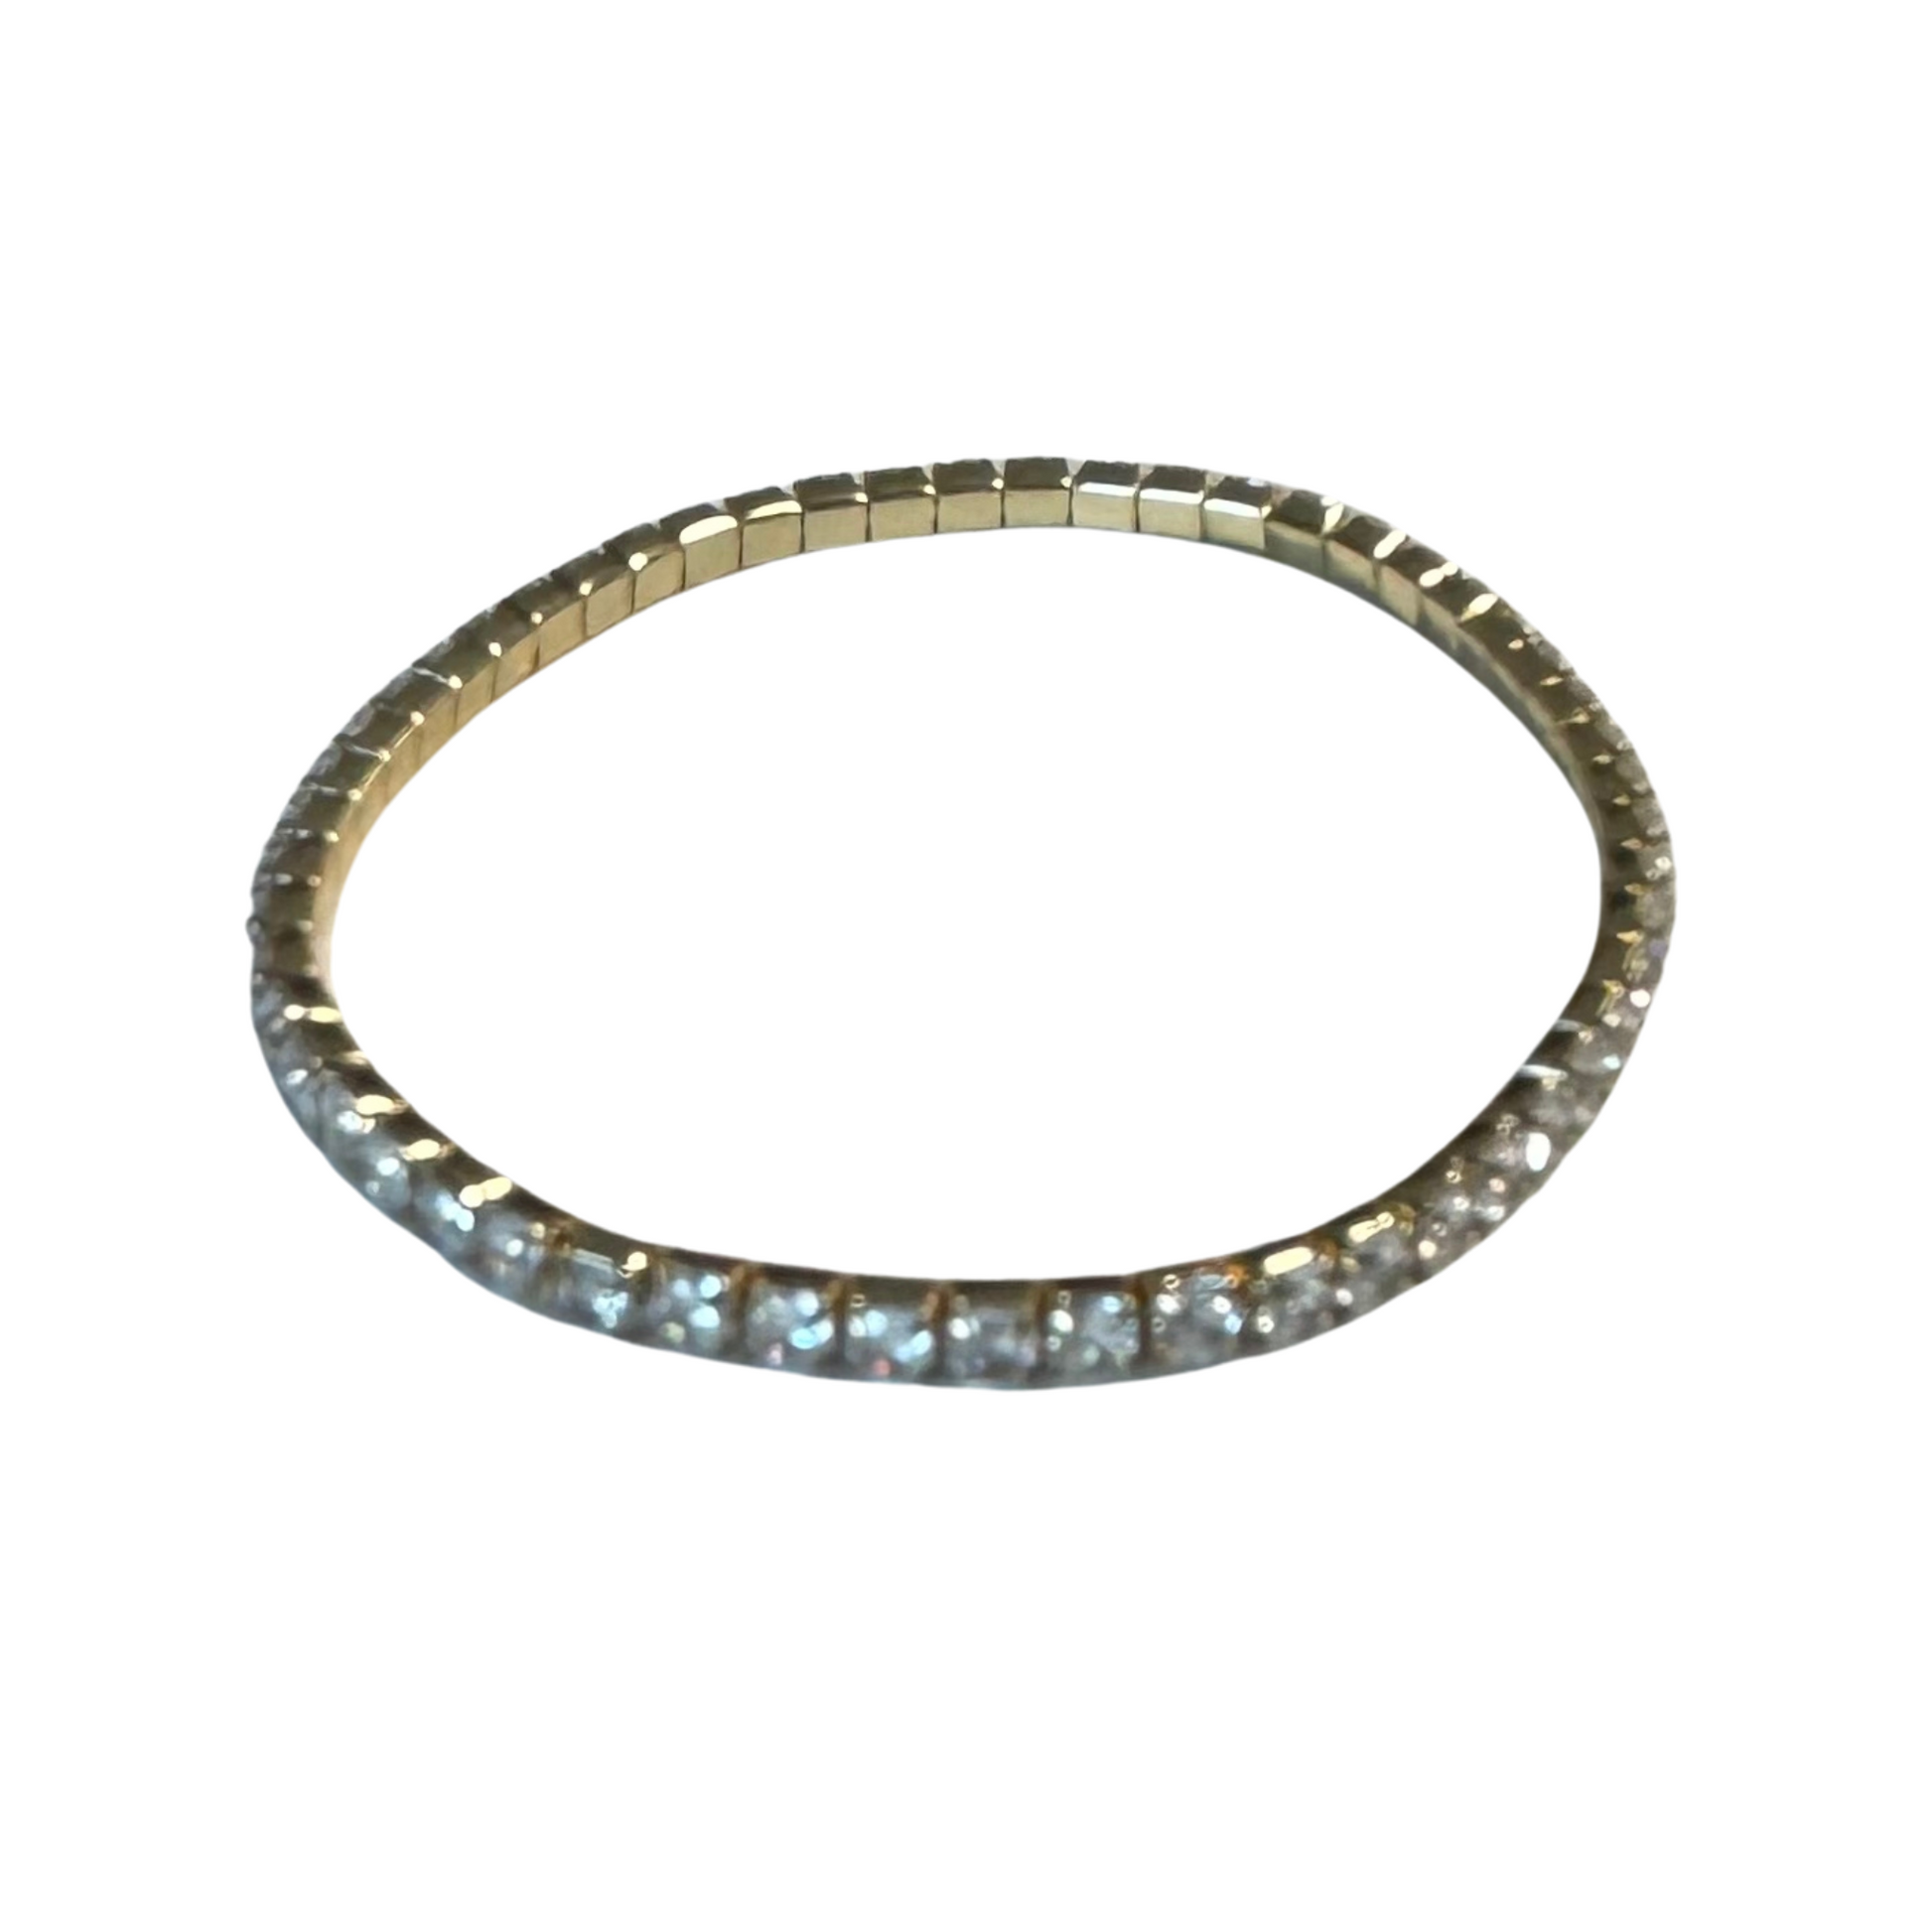 Expertly crafted with delicate rhinestones, this stretchy bracelet adds a touch of elegance to any look. Made with a gold-toned finish, it effortlessly complements any outfit. Elevate your style with this dainty and versatile accessory.